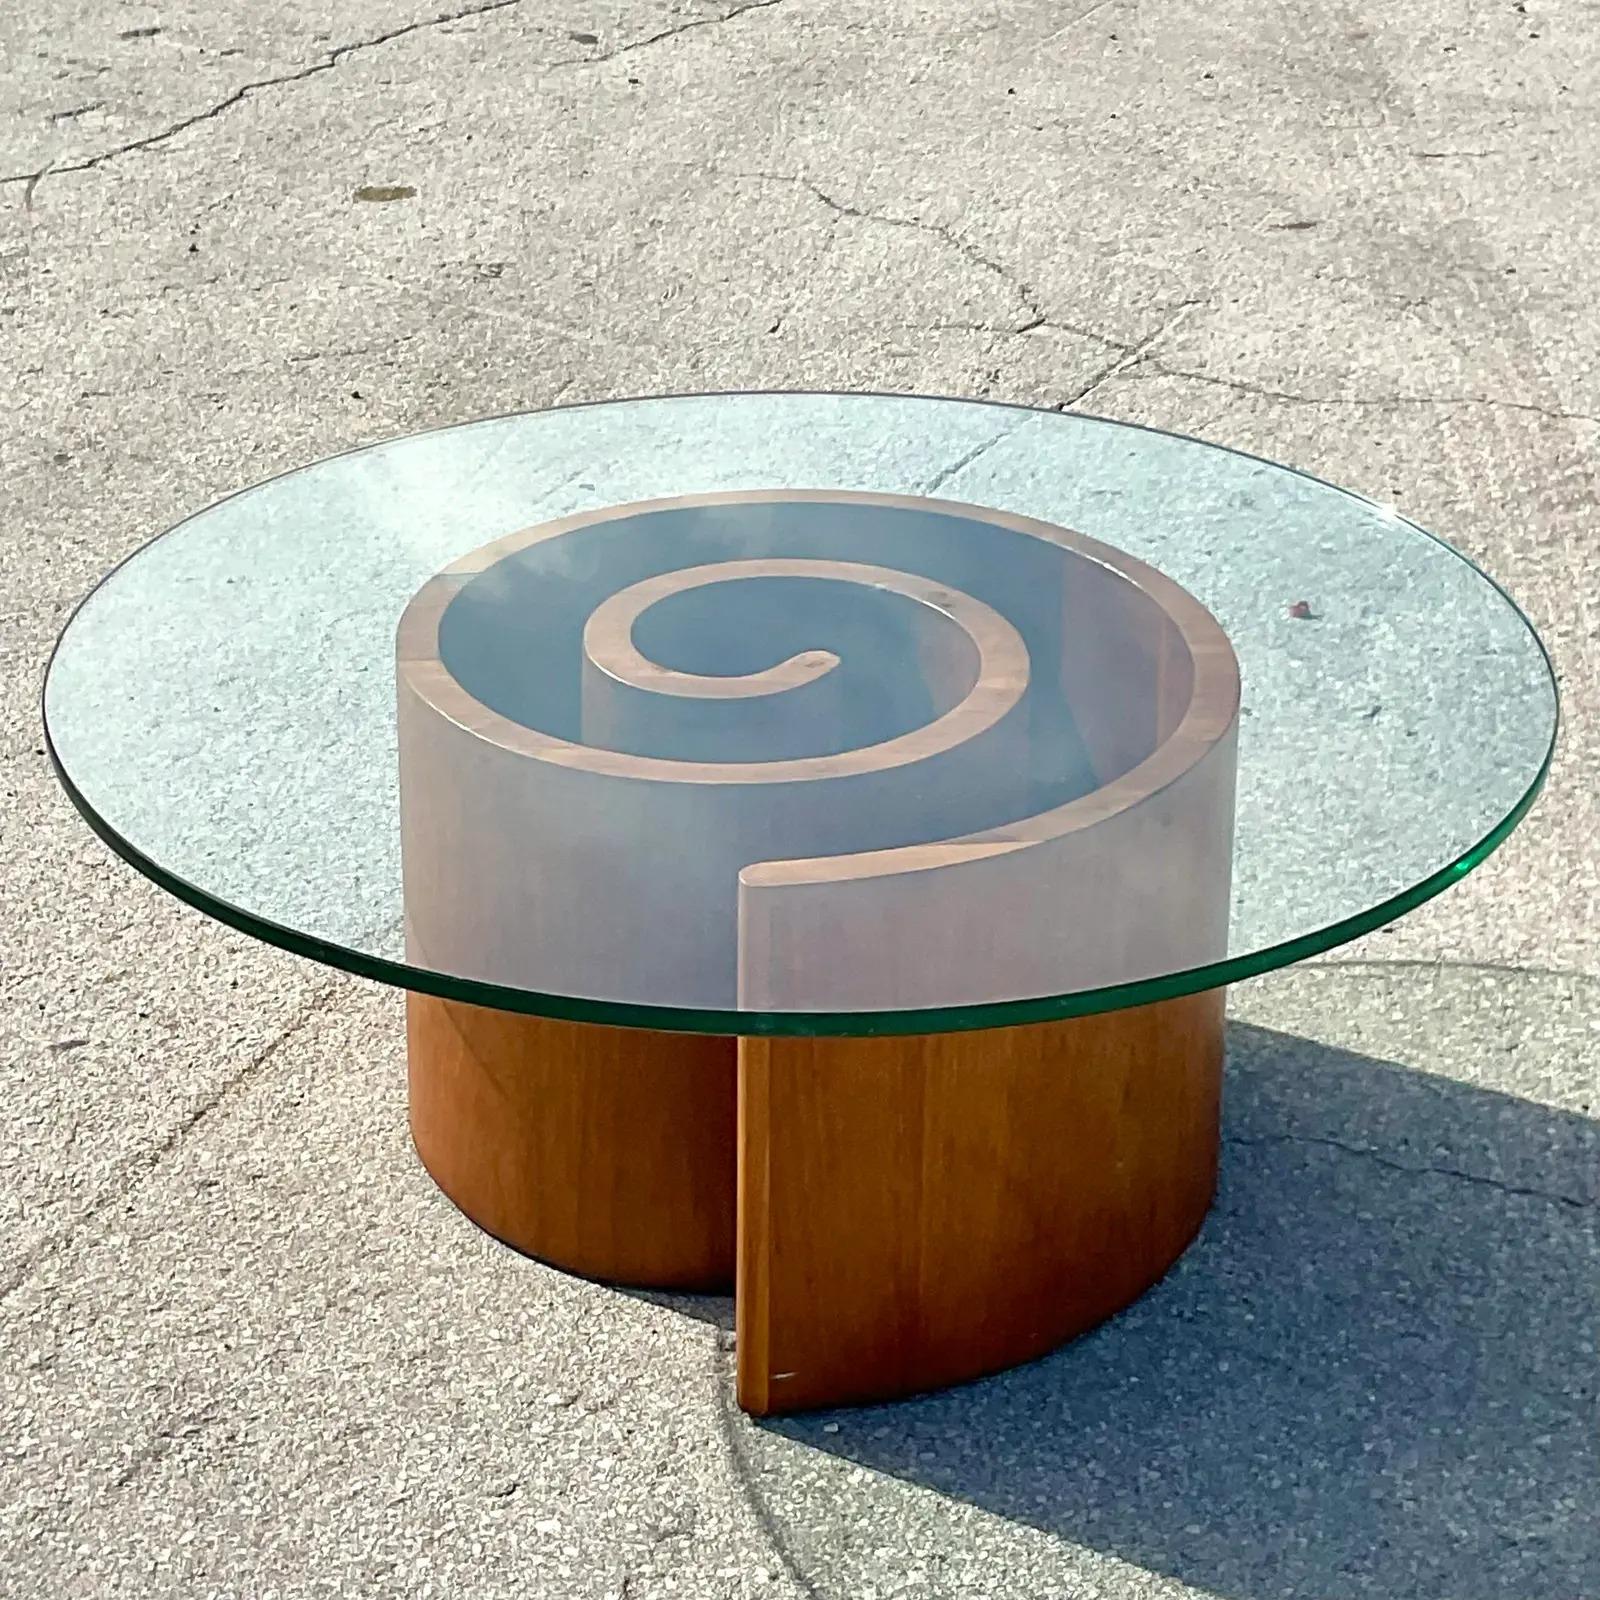 Superb MCM Wood under glass coffee table. Made by the iconic Vladimir Kagan for Selig. Unmarked. Acquired from a Chicago estate.